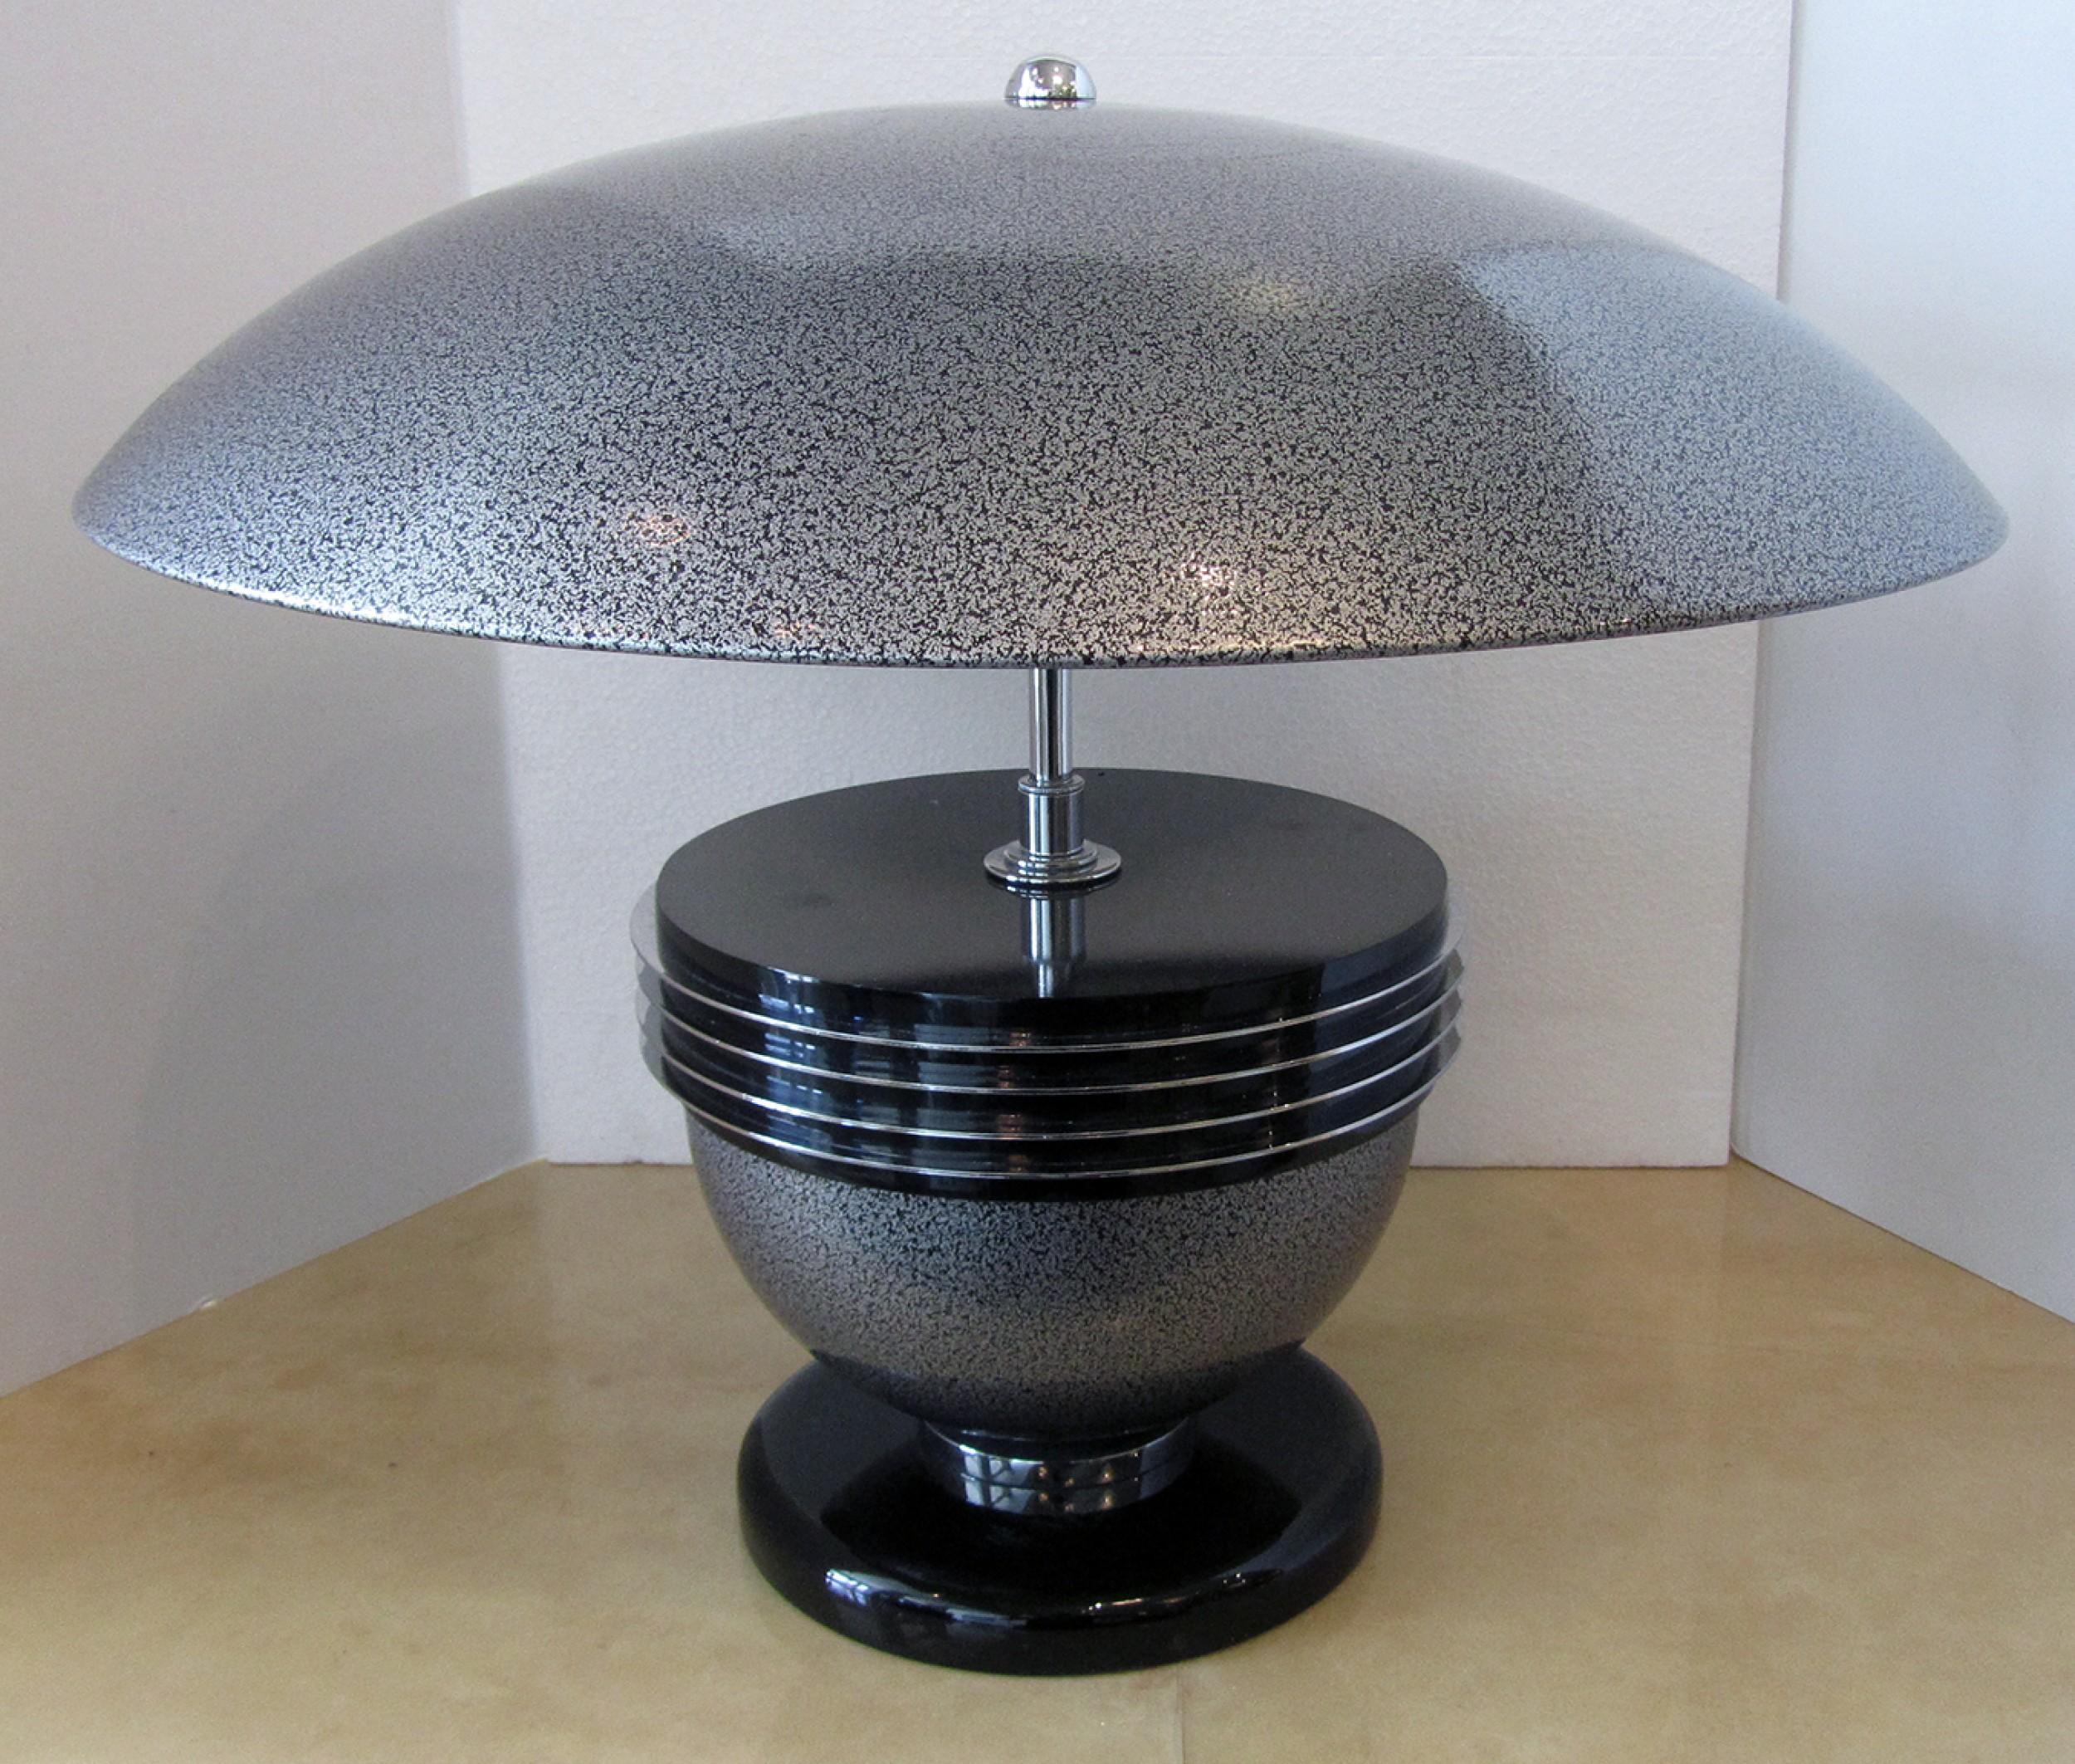 Midcentury American Modern table lamp with a black and silver metallic finish and domed matching shade. (Walter Prosper).